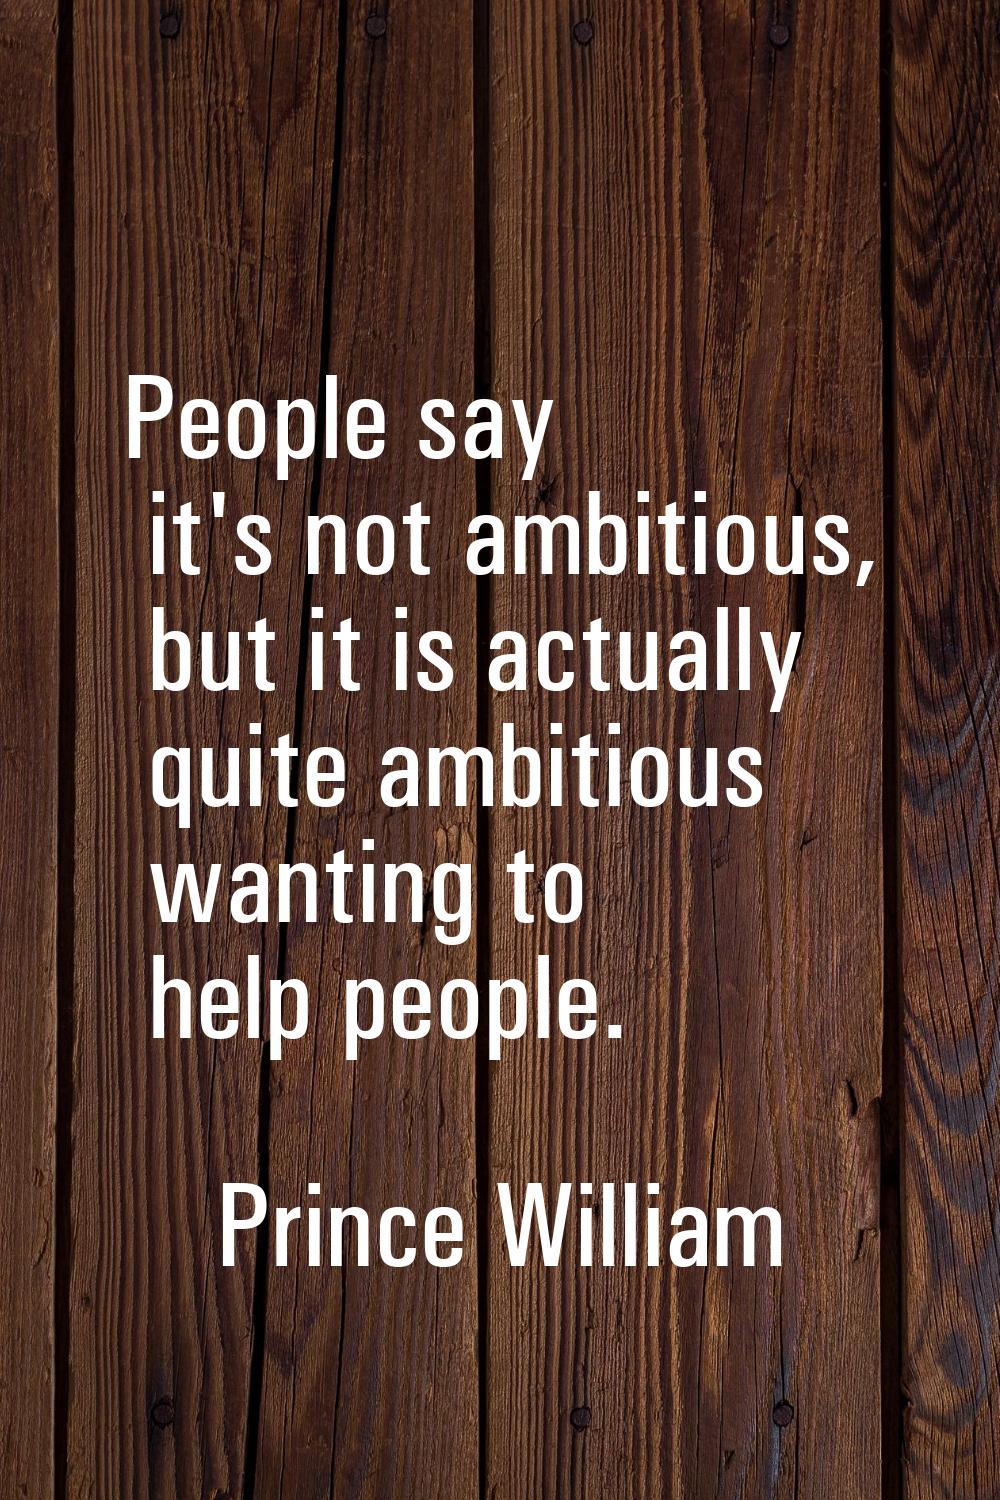 People say it's not ambitious, but it is actually quite ambitious wanting to help people.